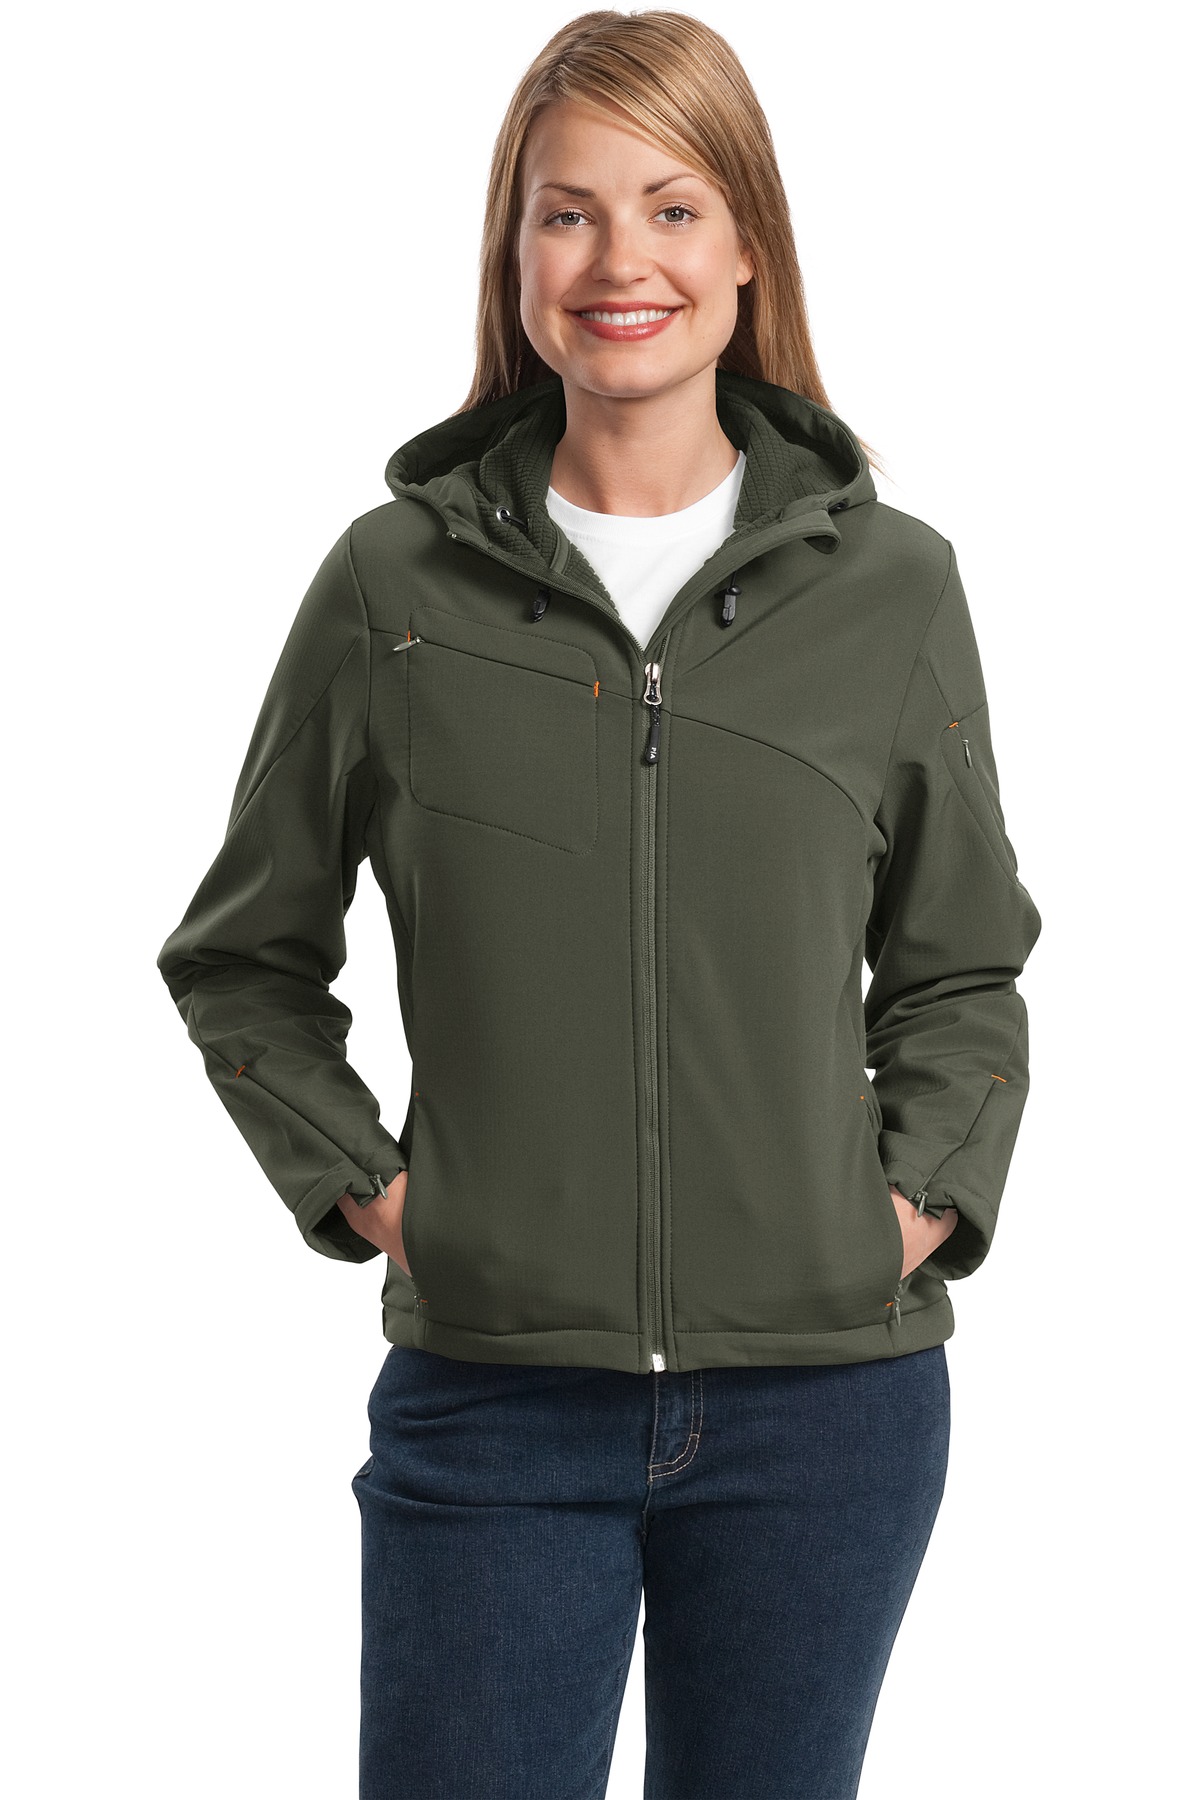 Textured Hooded Soft Shell Jacket - image 1 of 1